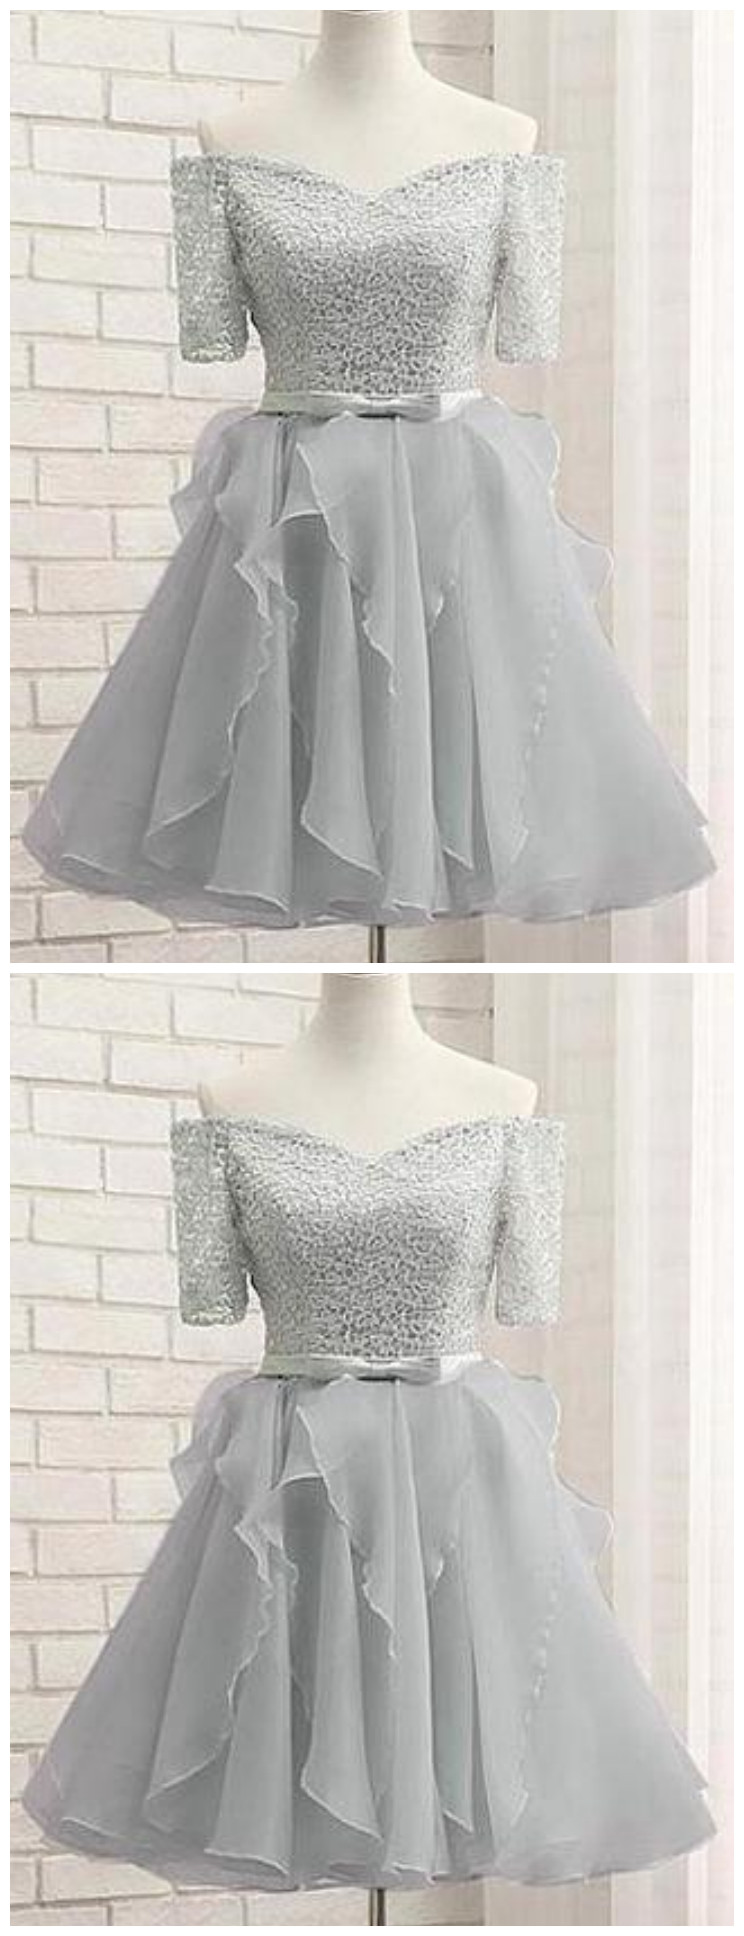 Silver Off Shoulder Lace A Line Prom Dresses Short Homecoming Dresses